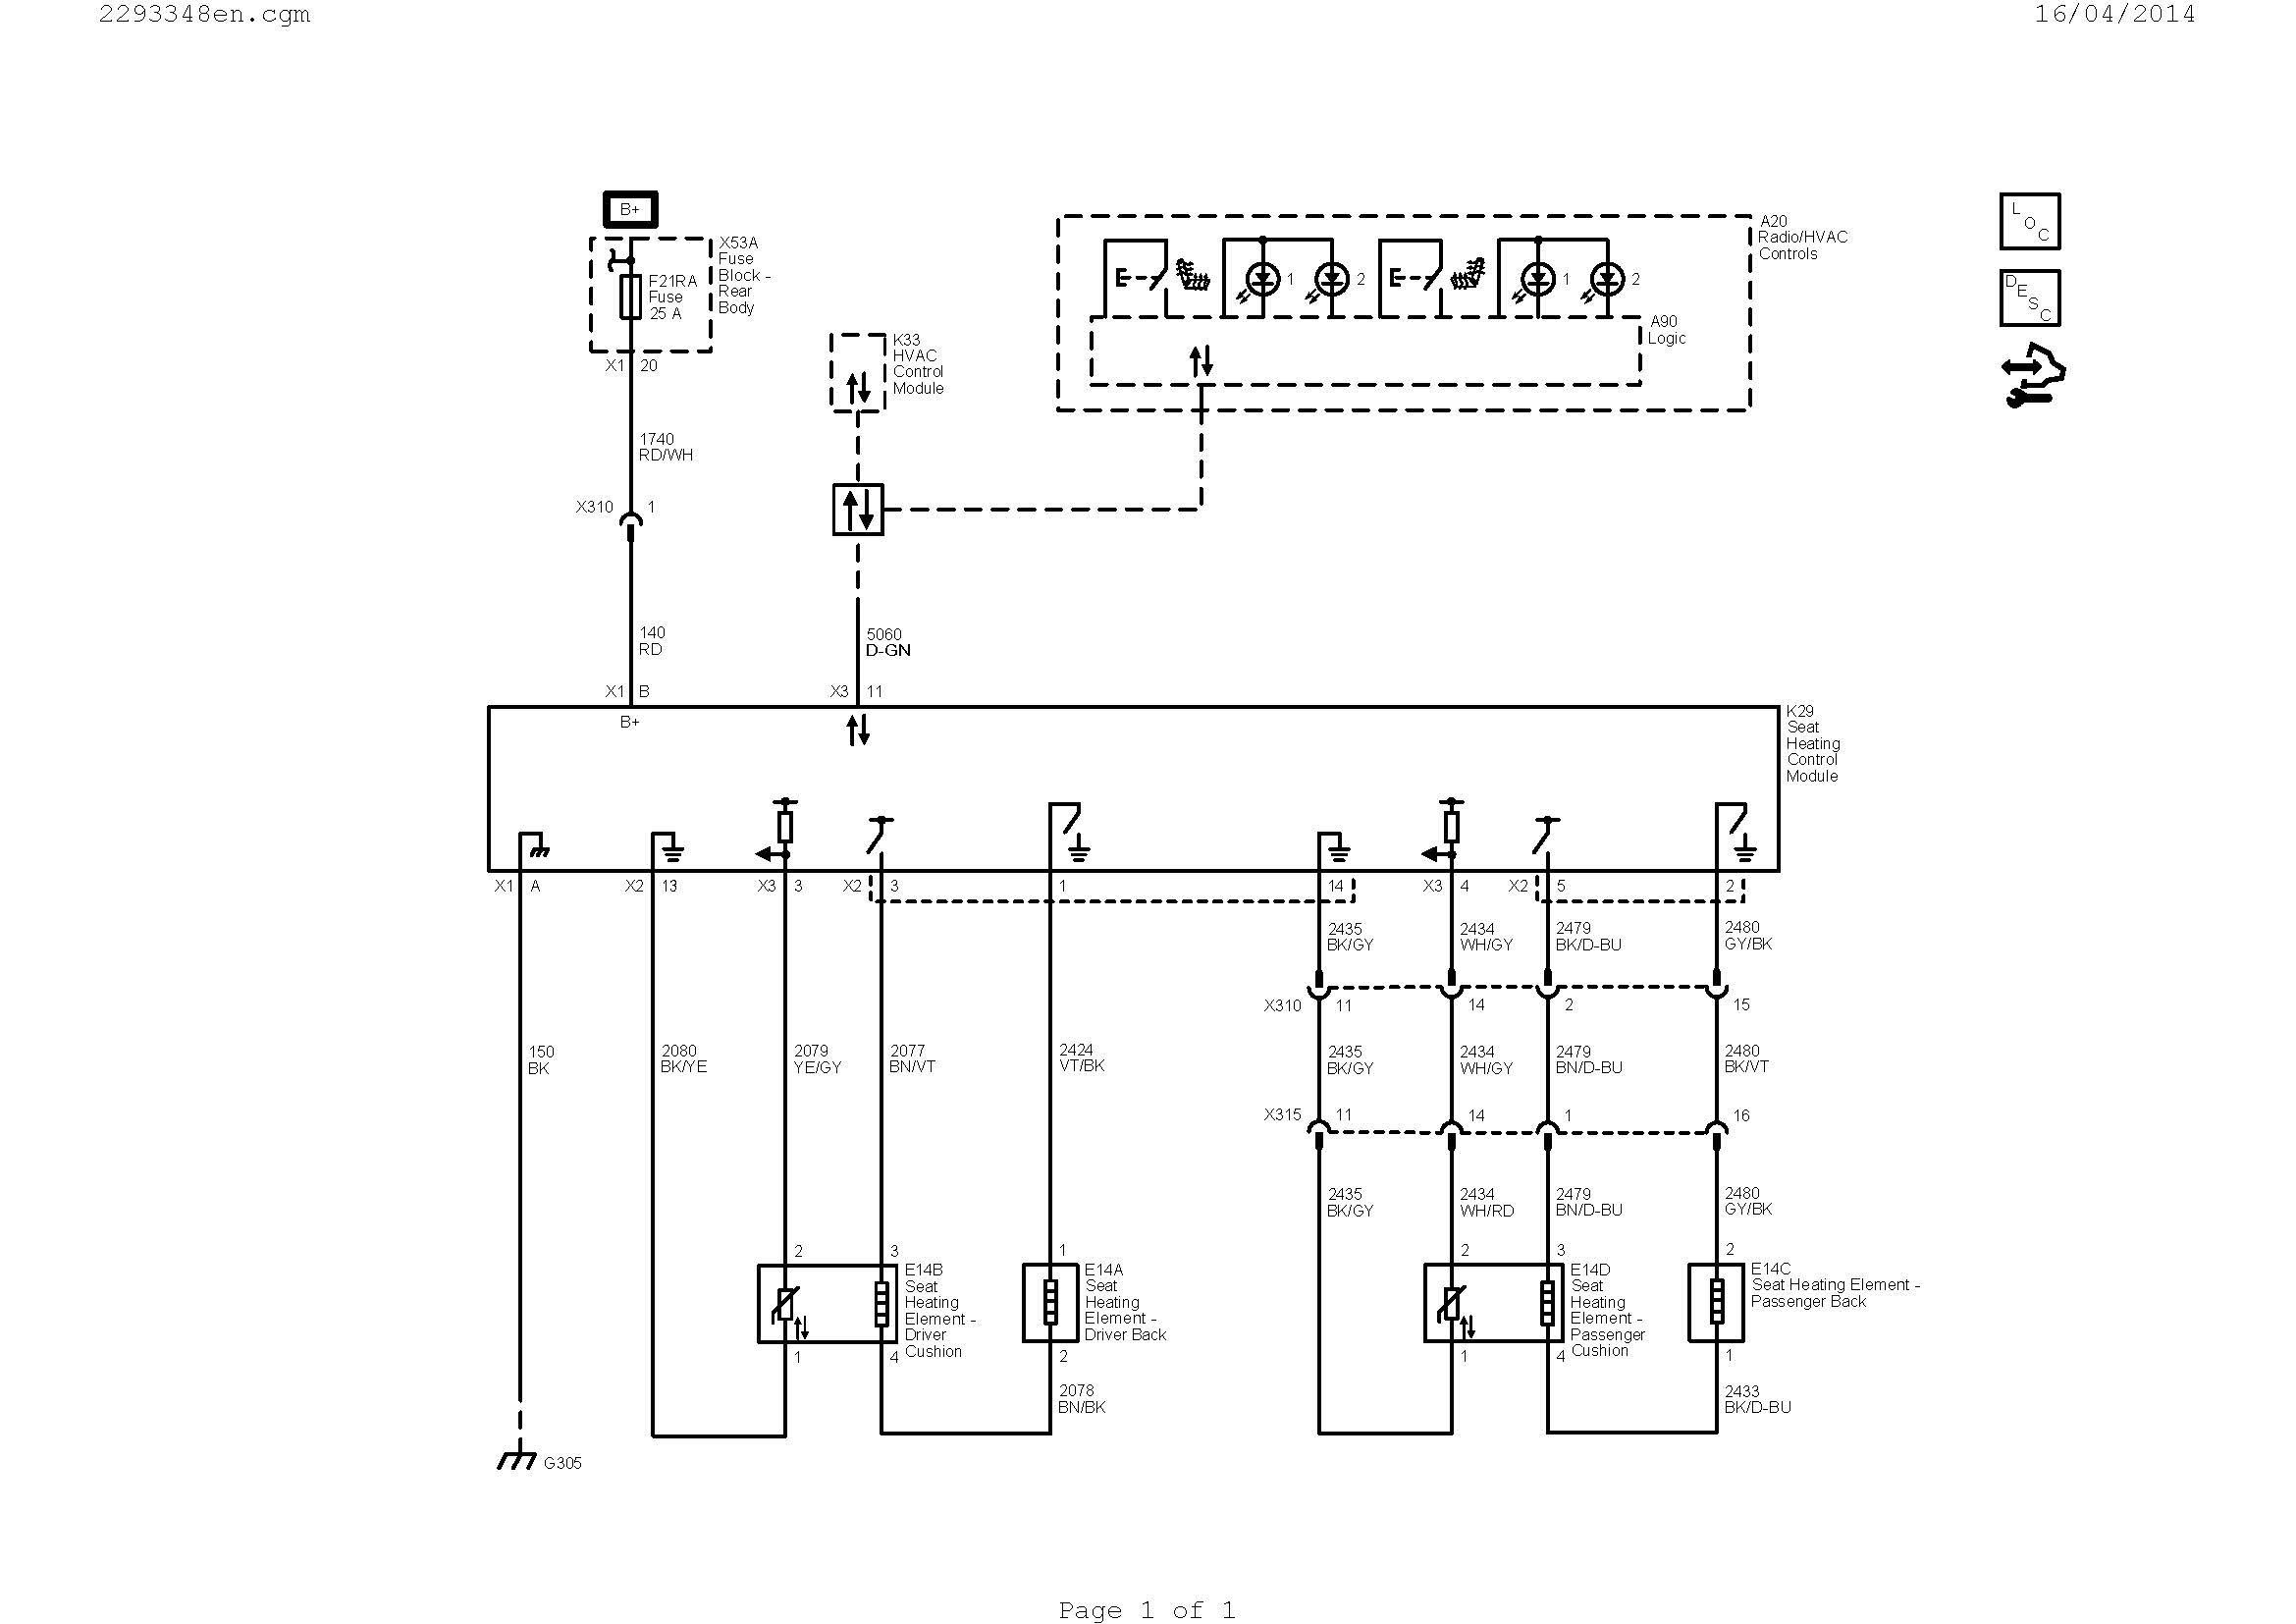 ac thermostat wiring diagram Collection Wiring A Ac thermostat Diagram New Wiring Diagram Ac Valid